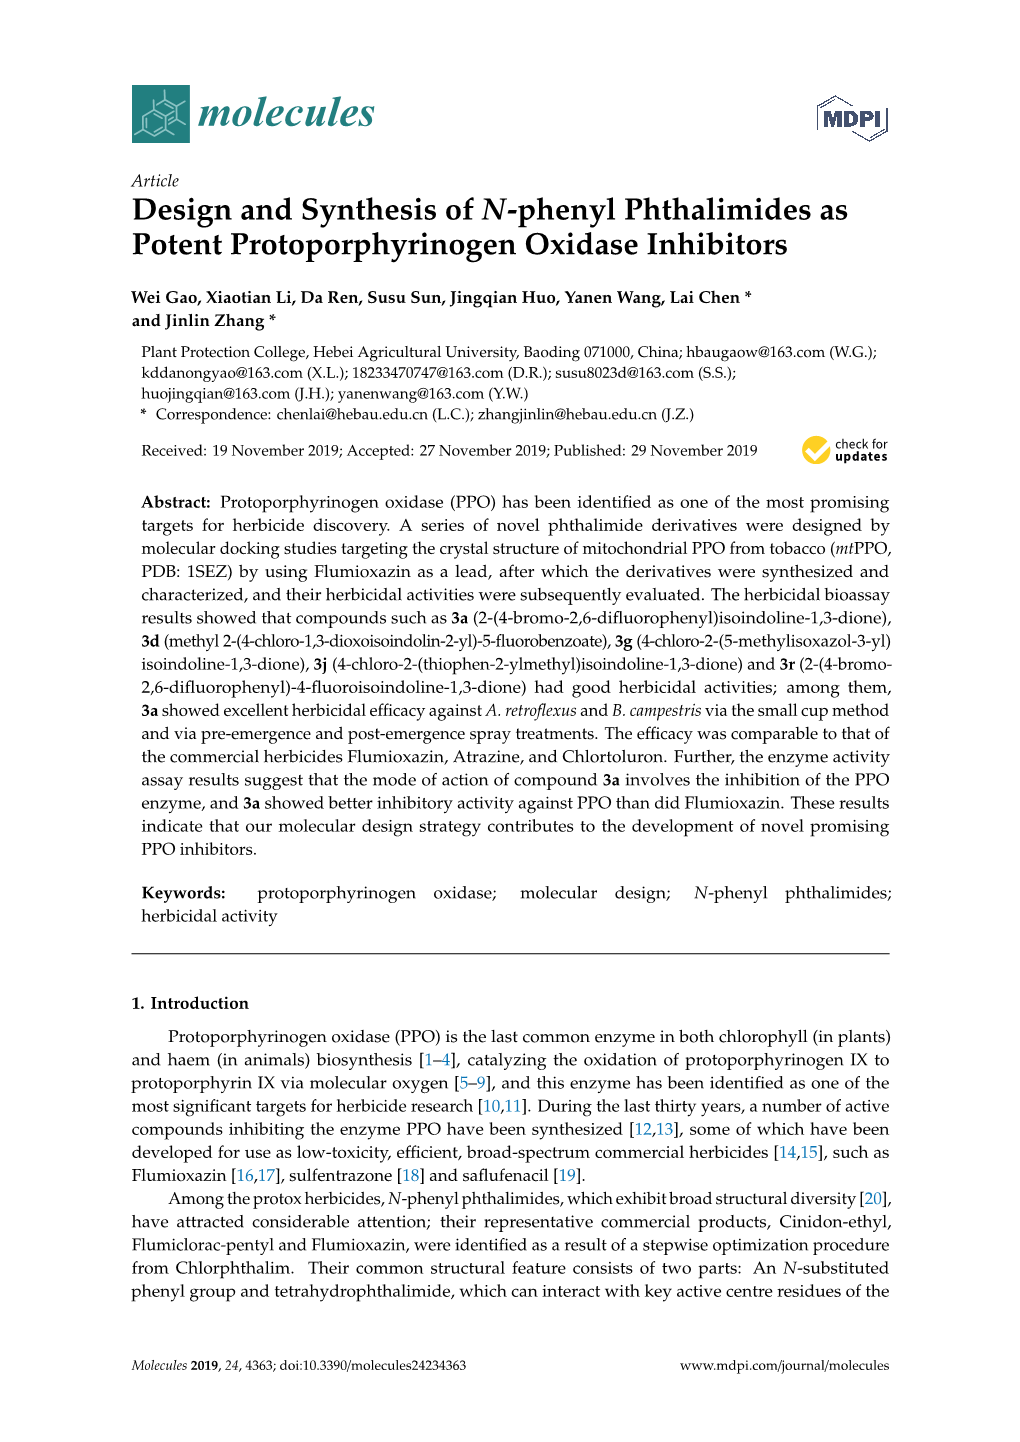 Design and Synthesis of N-Phenyl Phthalimides As Potent Protoporphyrinogen Oxidase Inhibitors